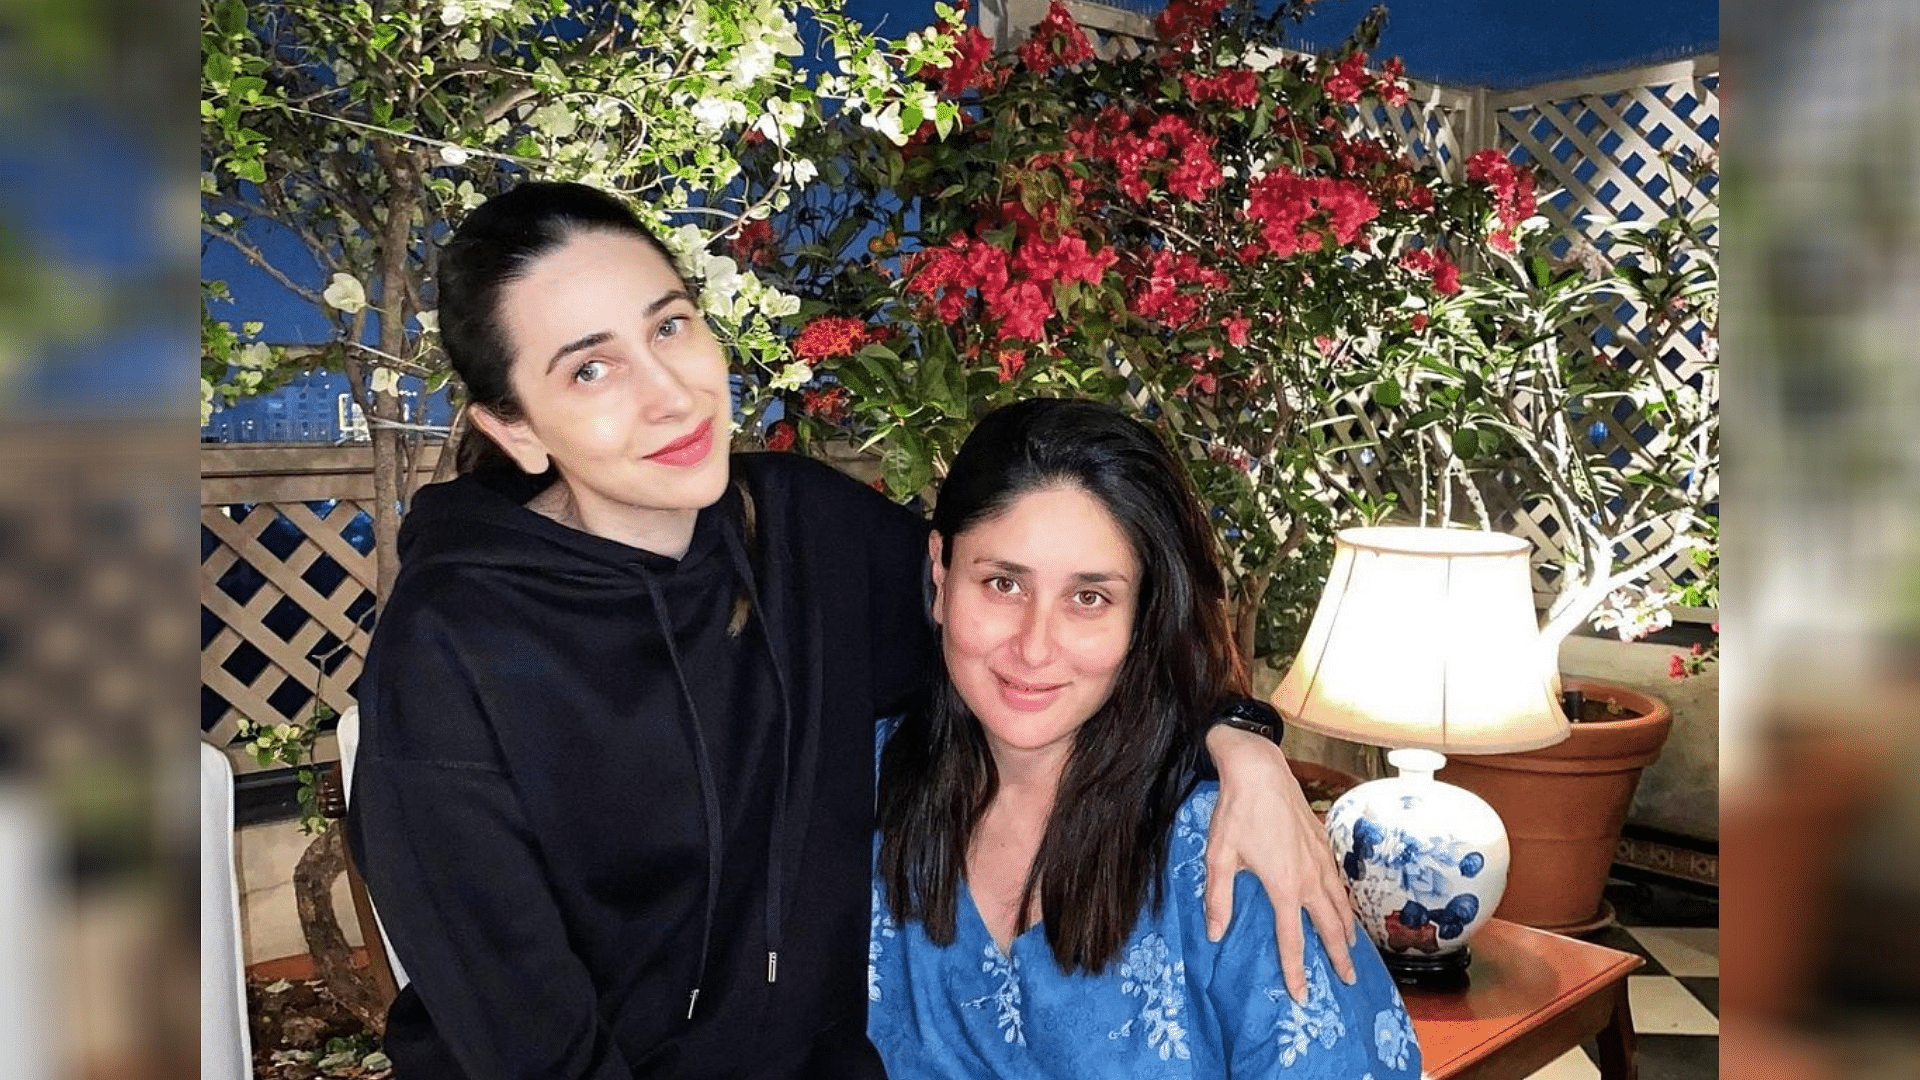 Kareena Kapoor spends time with her sister Karisma Kapoor in her new home.